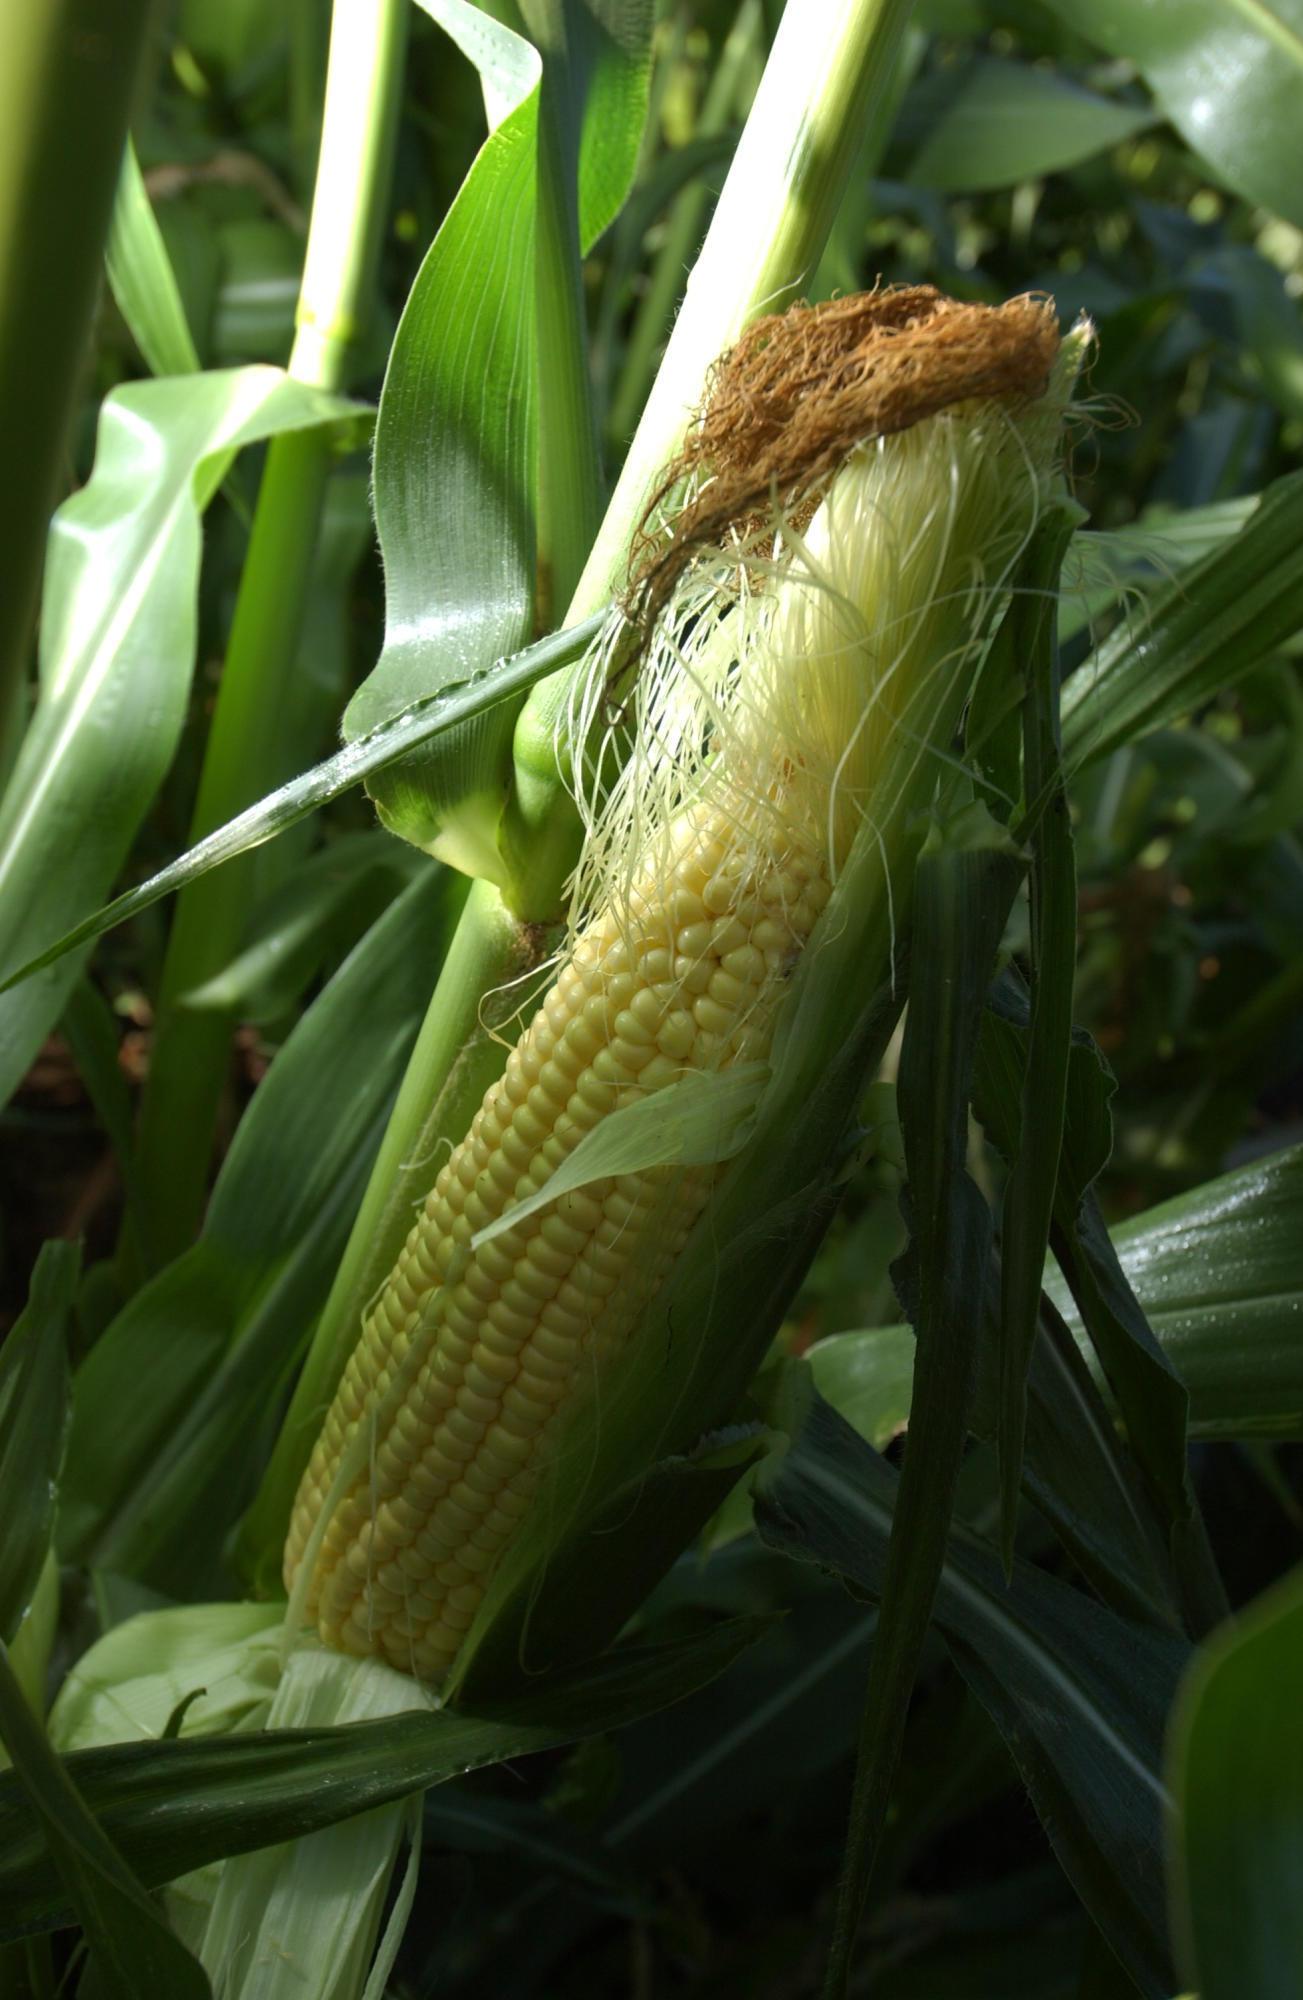 Early morning light on nearly ripe sweet corn with the husk pulled away at the OSU vegetable farm outside Corvallis.